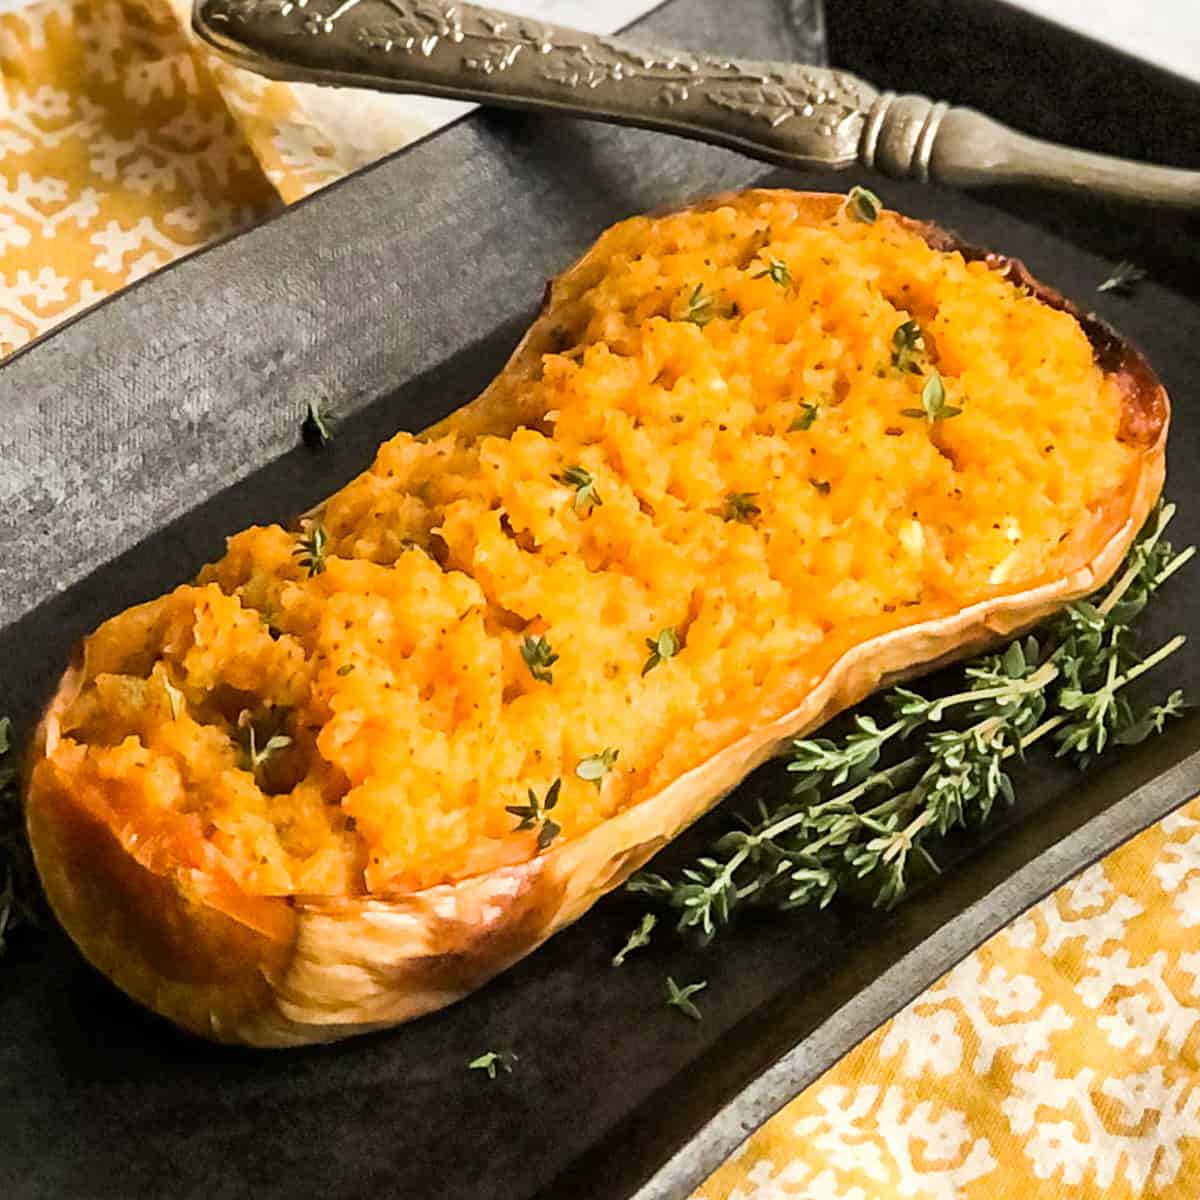 Mashed Butternut Squash inside it's skin on a black platter garnished with fresh thyme springs.